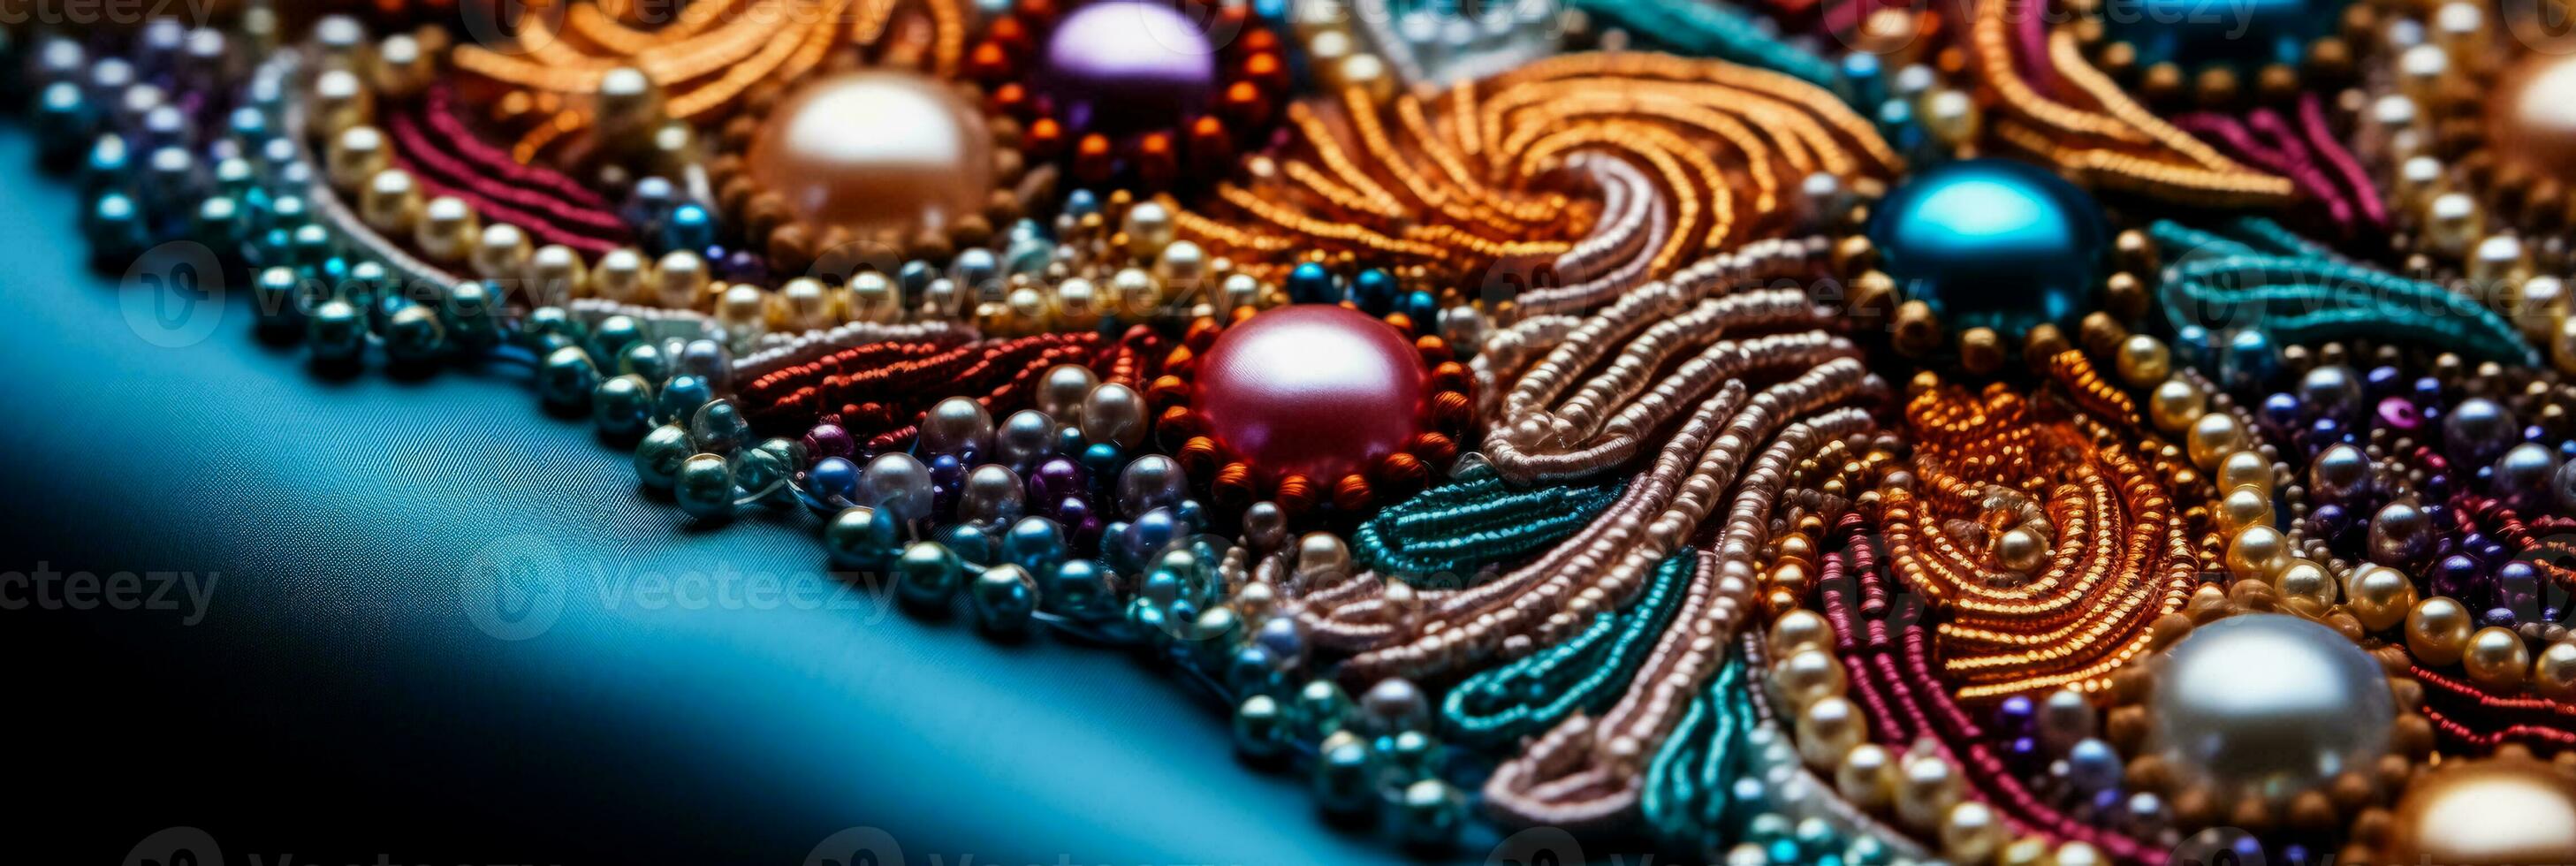 Macro captures of bead embroidery details on assorted soft textile backgrounds photo